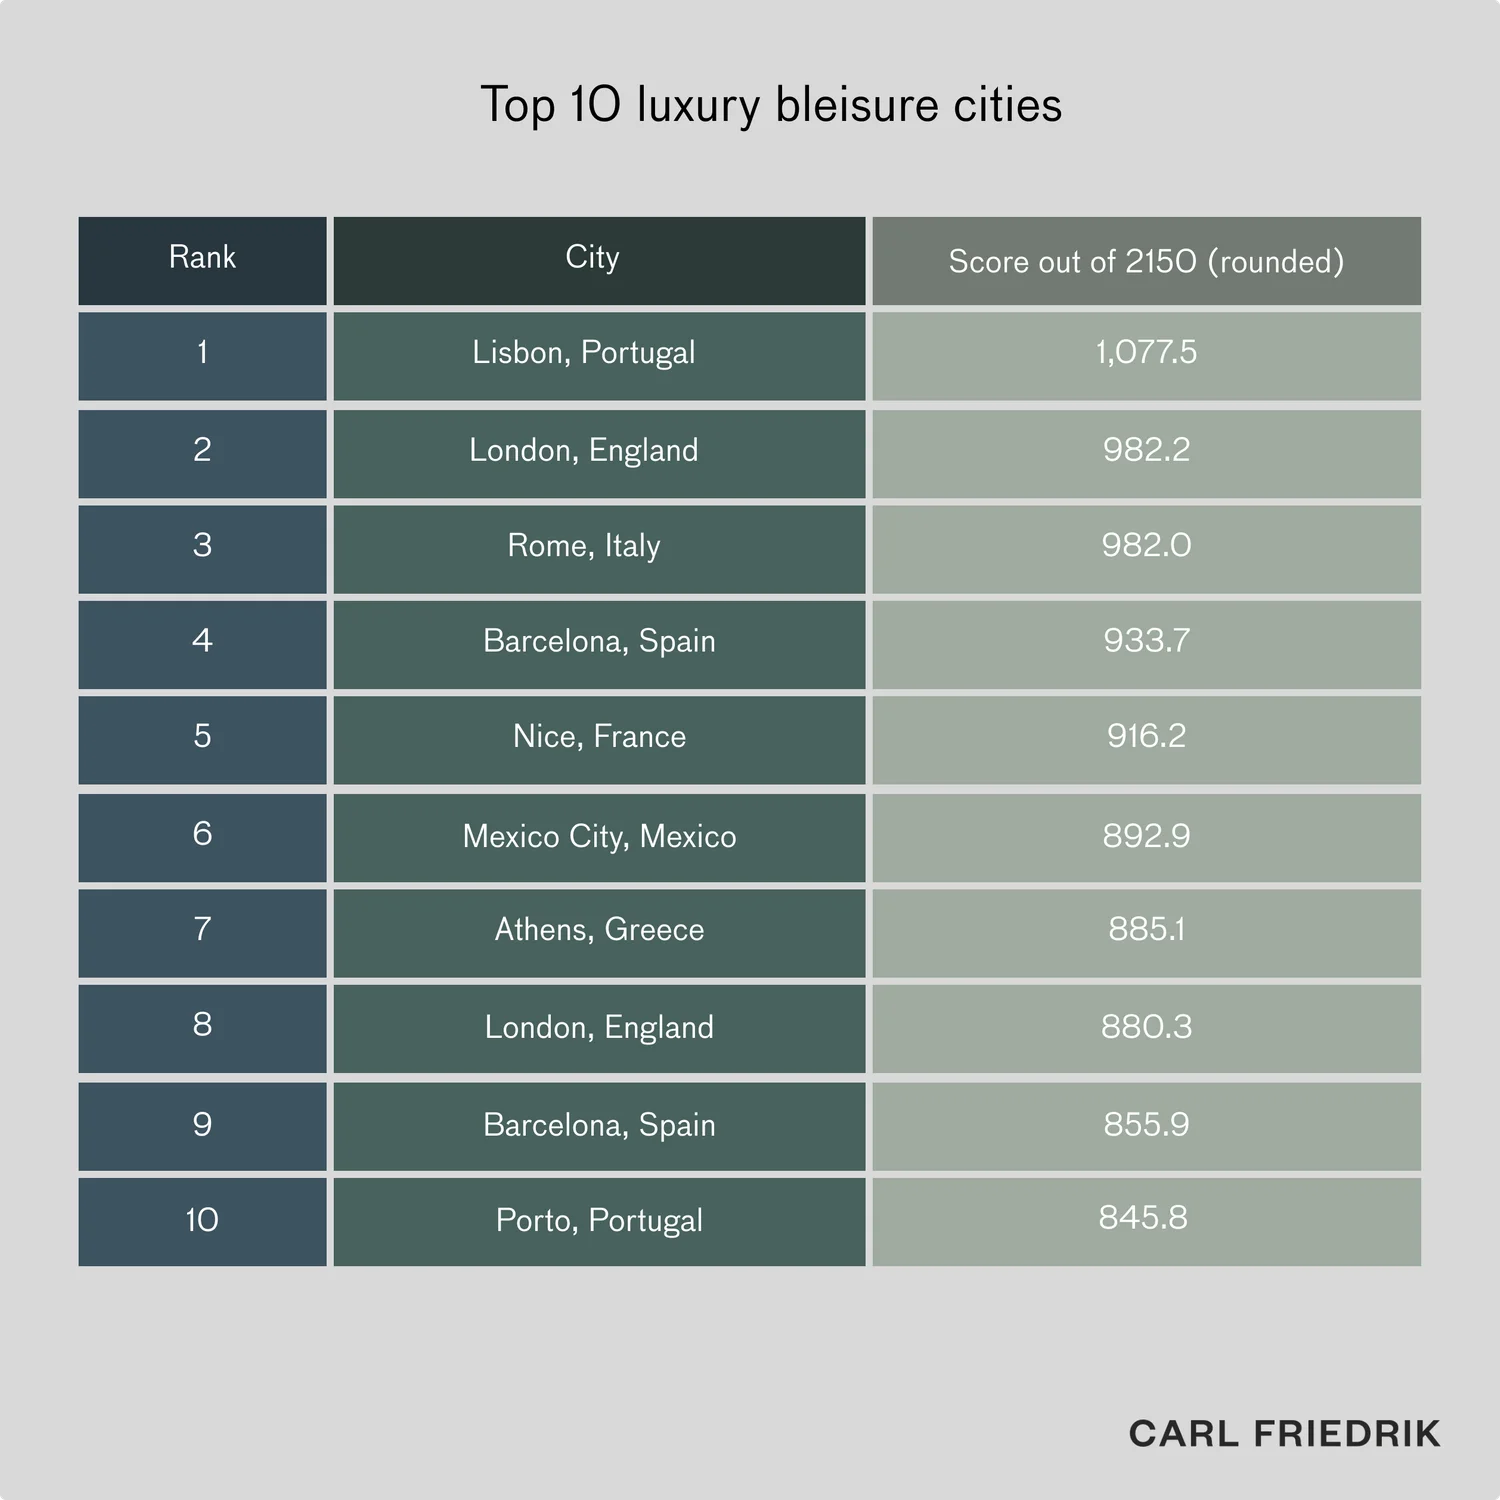 The World’s Greatest Cities For Luxurious Bleisure, Ranked